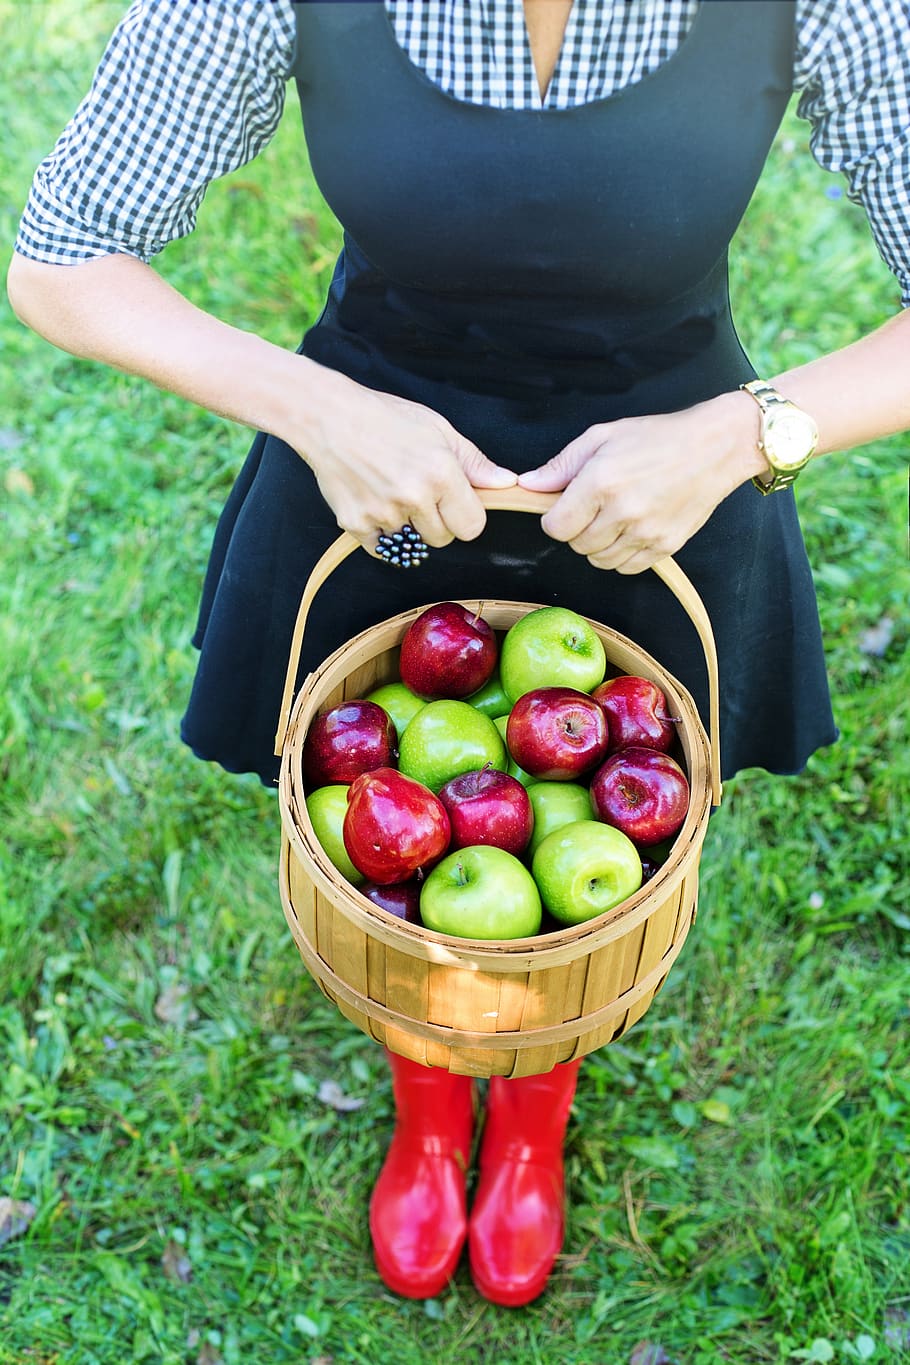 basket of apples, apple picking, woman, autumn, fall, fruit, basket, healthy, apples, nature